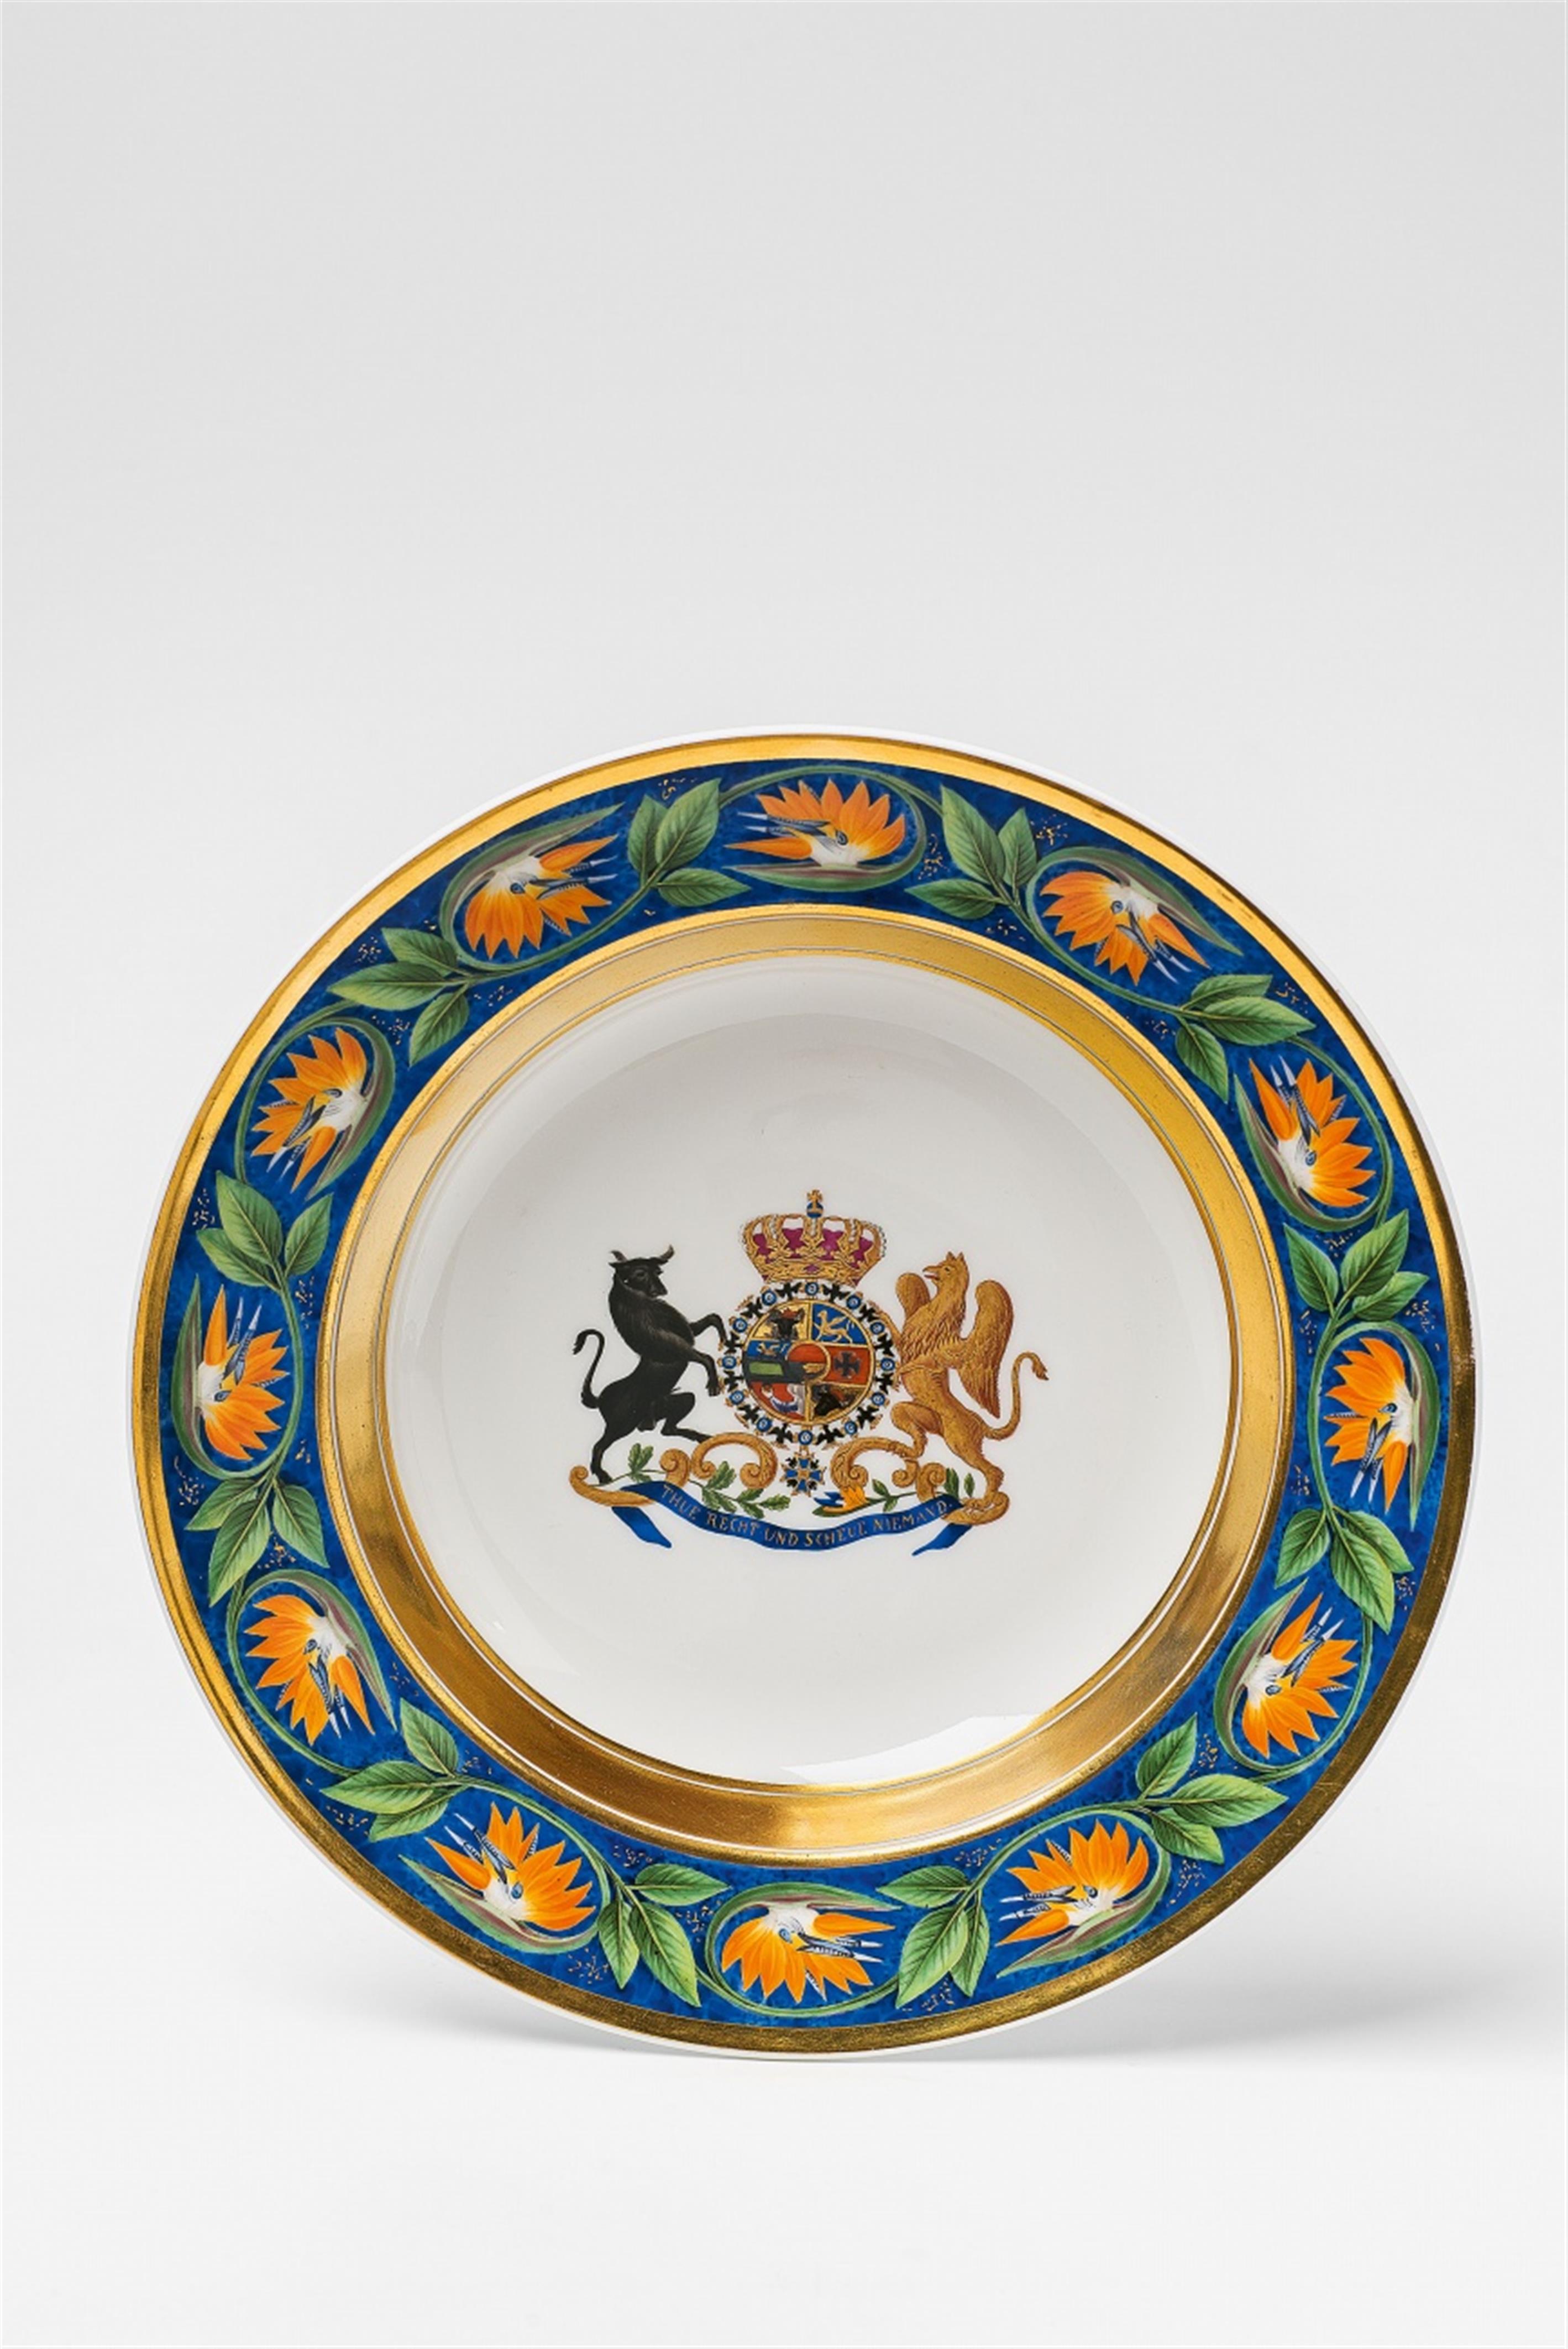 A Berlin KPM porcelain bowl from the service for the Grand Duke of Mecklenburg-Strelitz - image-1